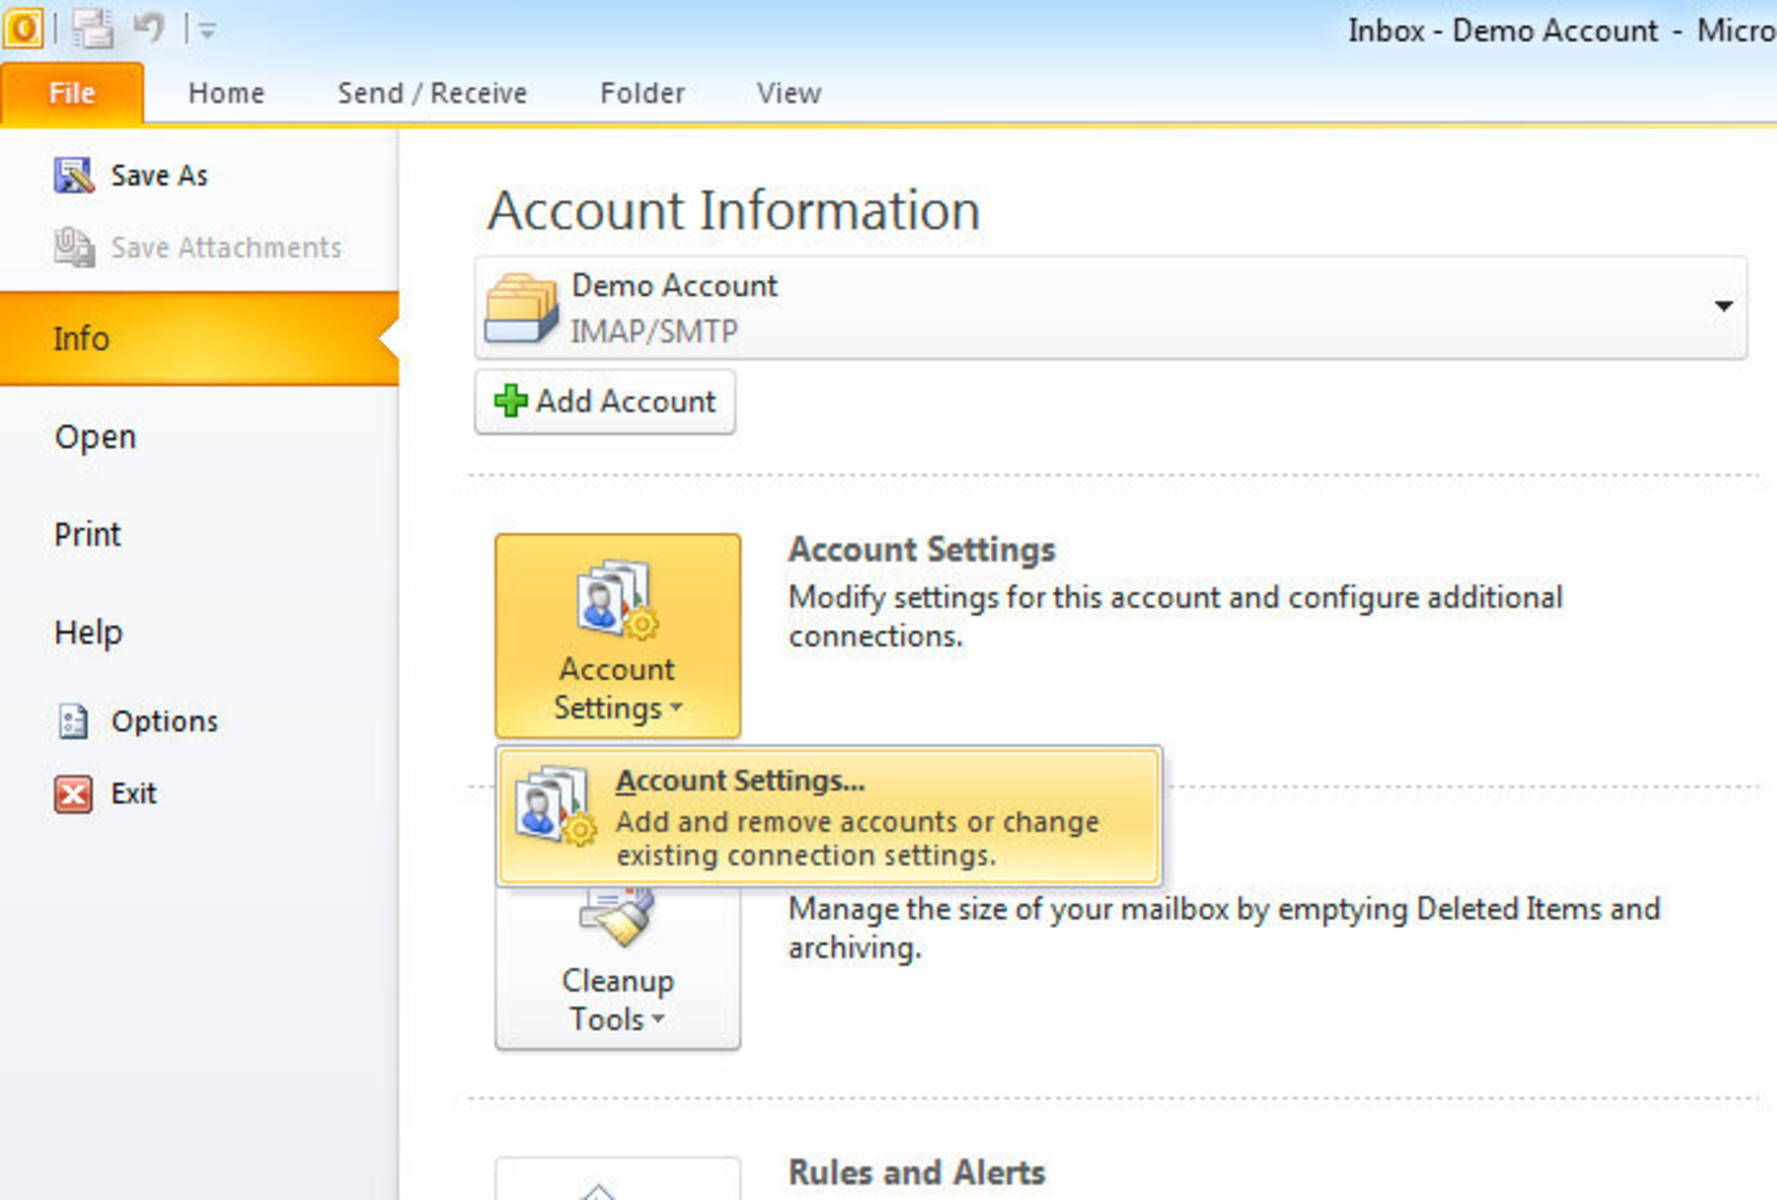 Step 1 » From the File menu, select Info and choose "Account Settings".